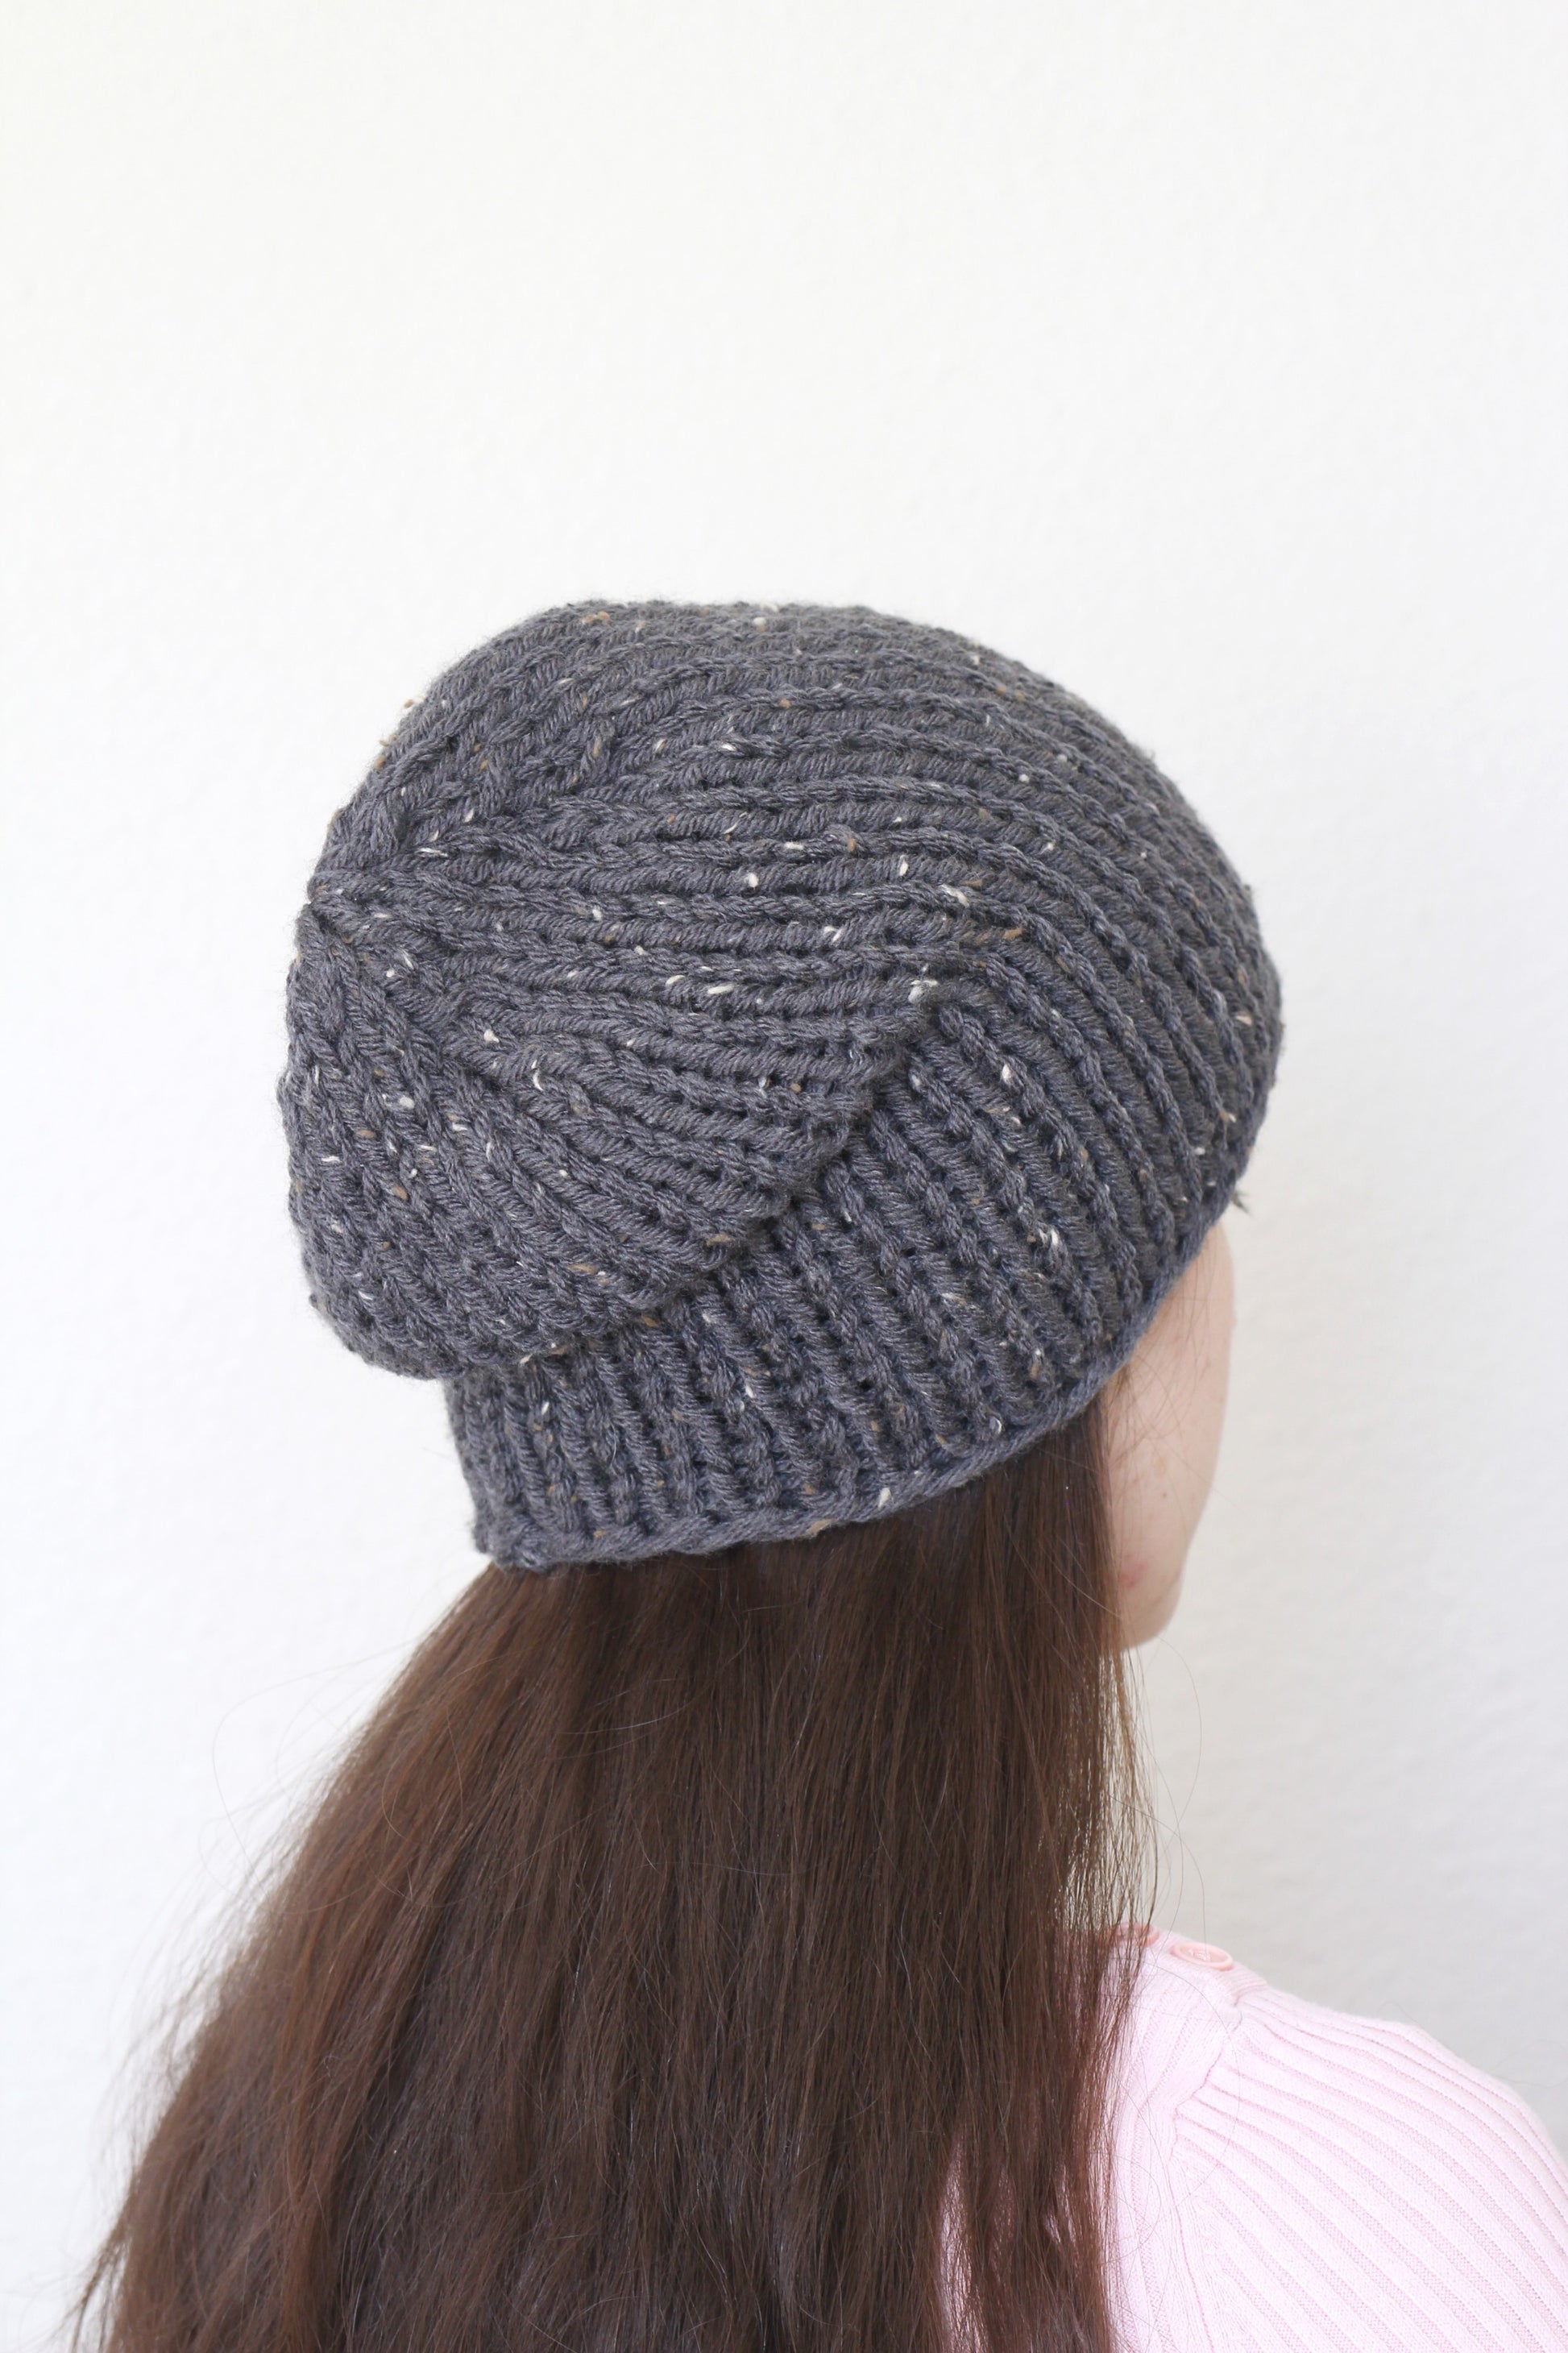 Beanie hat, knit hat, slouchy hat, knit beanie in black color